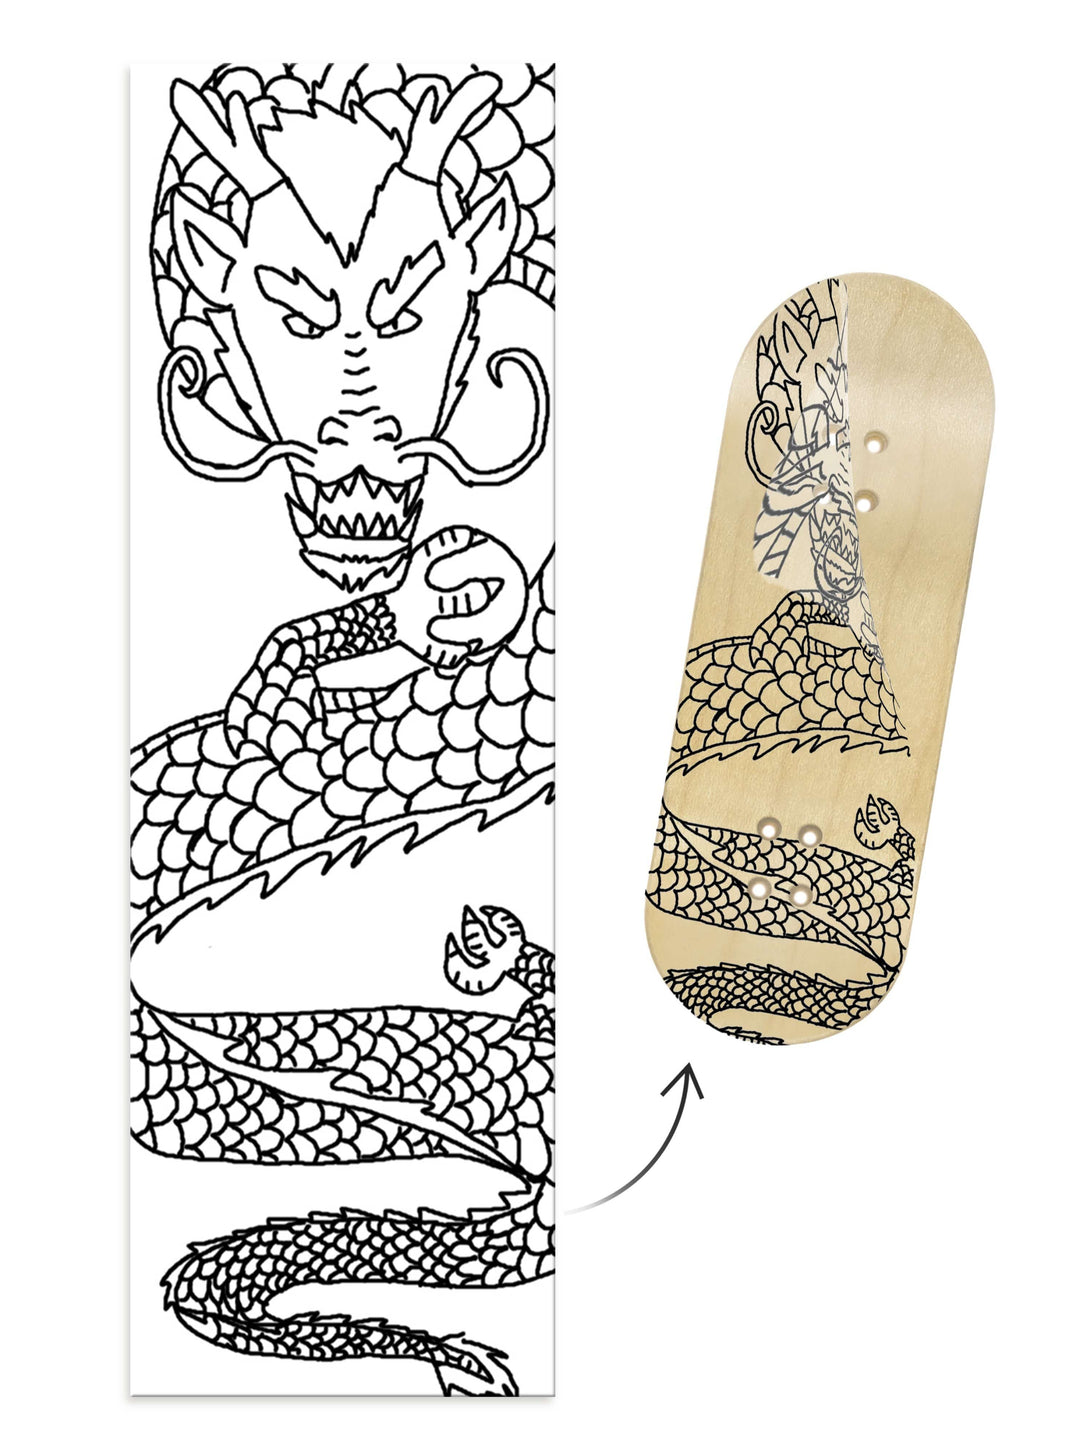 Teak Tuning "Black Dragon Born" WellVentions Collaboration Deck Graphic Wrap - Designed by Christian - 35mm x 110mm (Transparent Background)